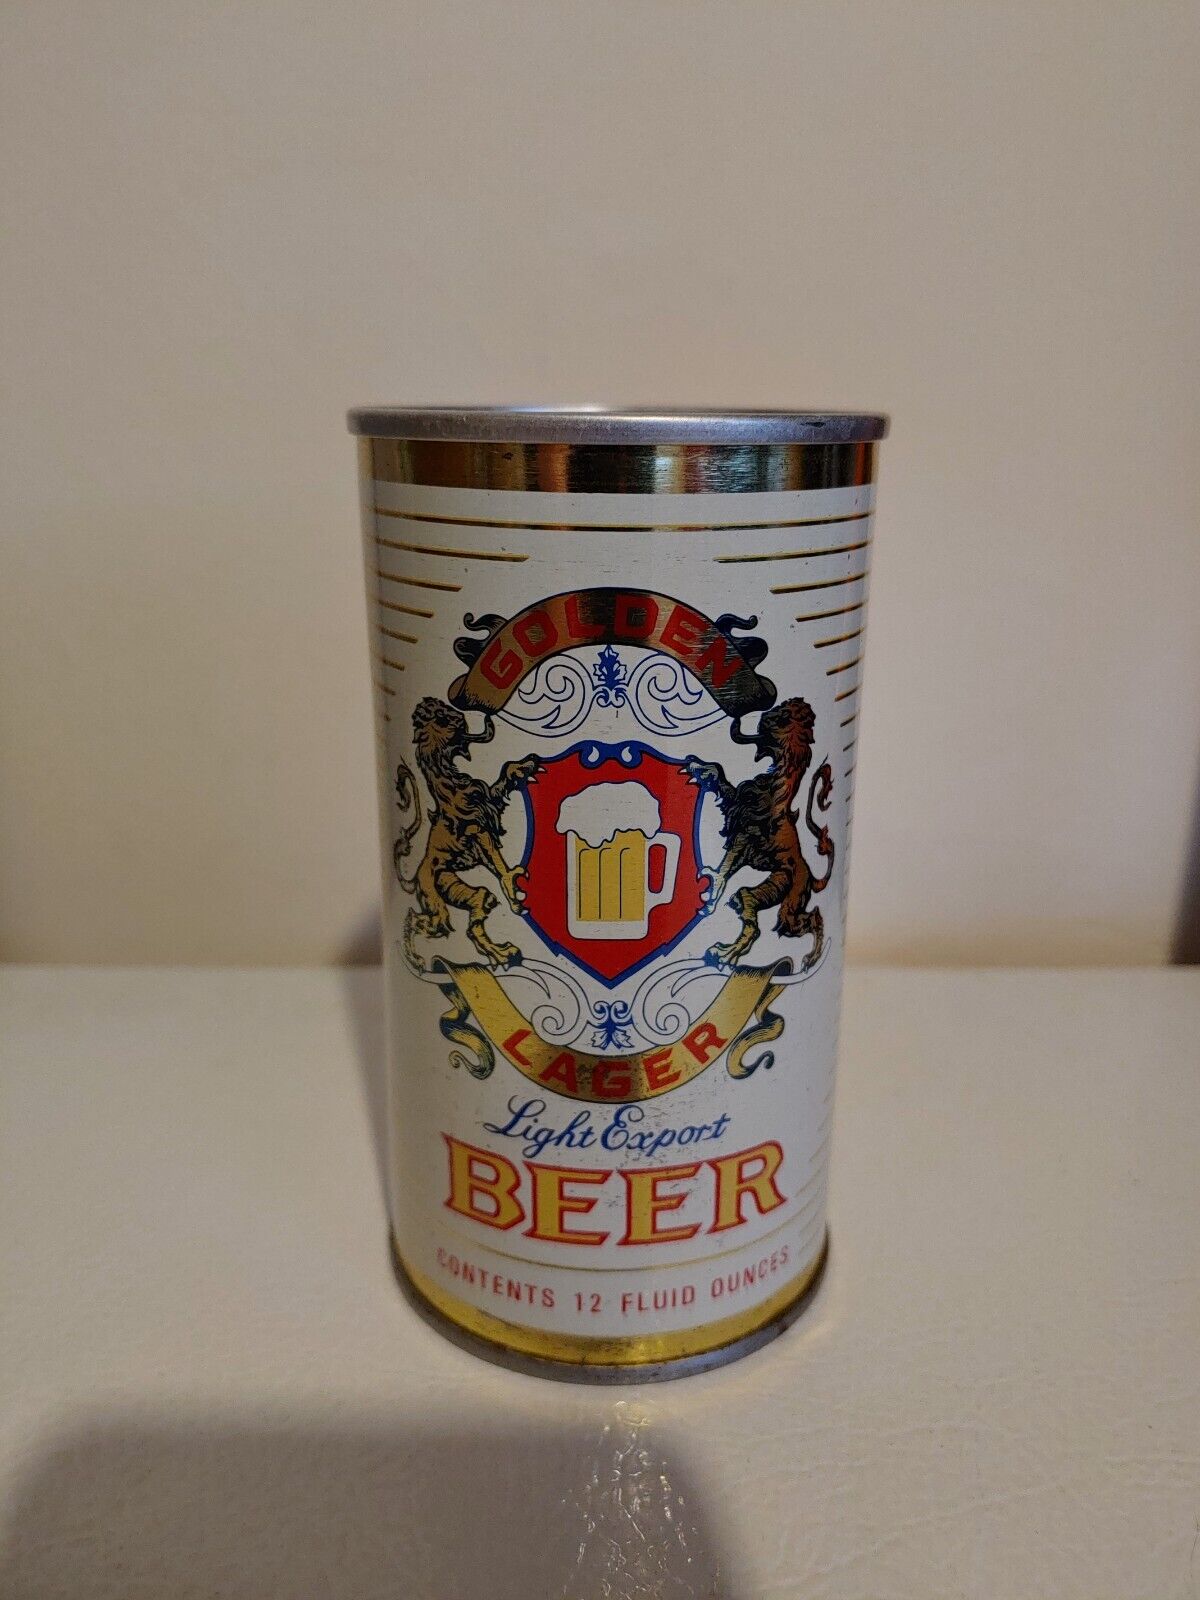 12oz Golden Lager (Food Giant) Beer Straight Steel Pull Tab Beer Can Supermarket